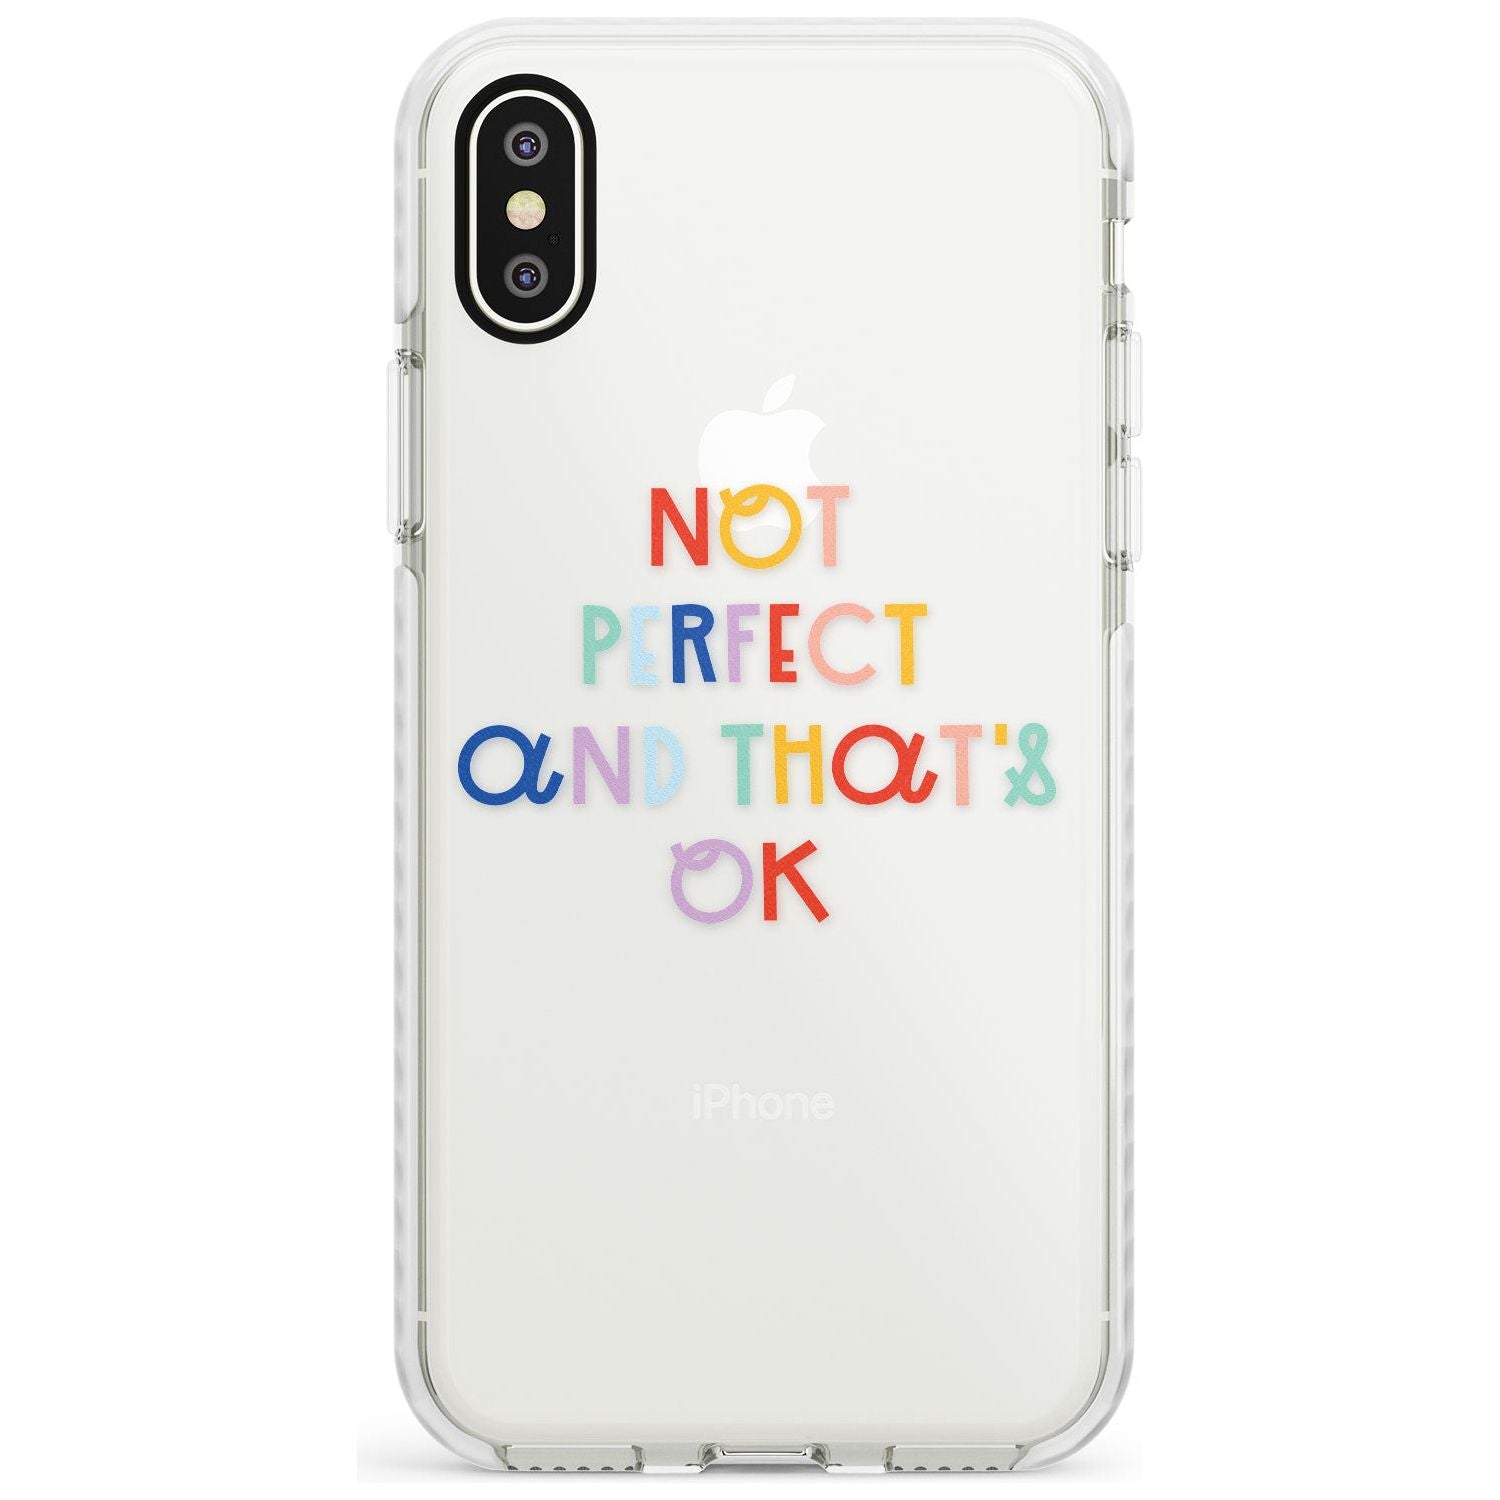 Not Perfect - Clear Impact Phone Case for iPhone X XS Max XR